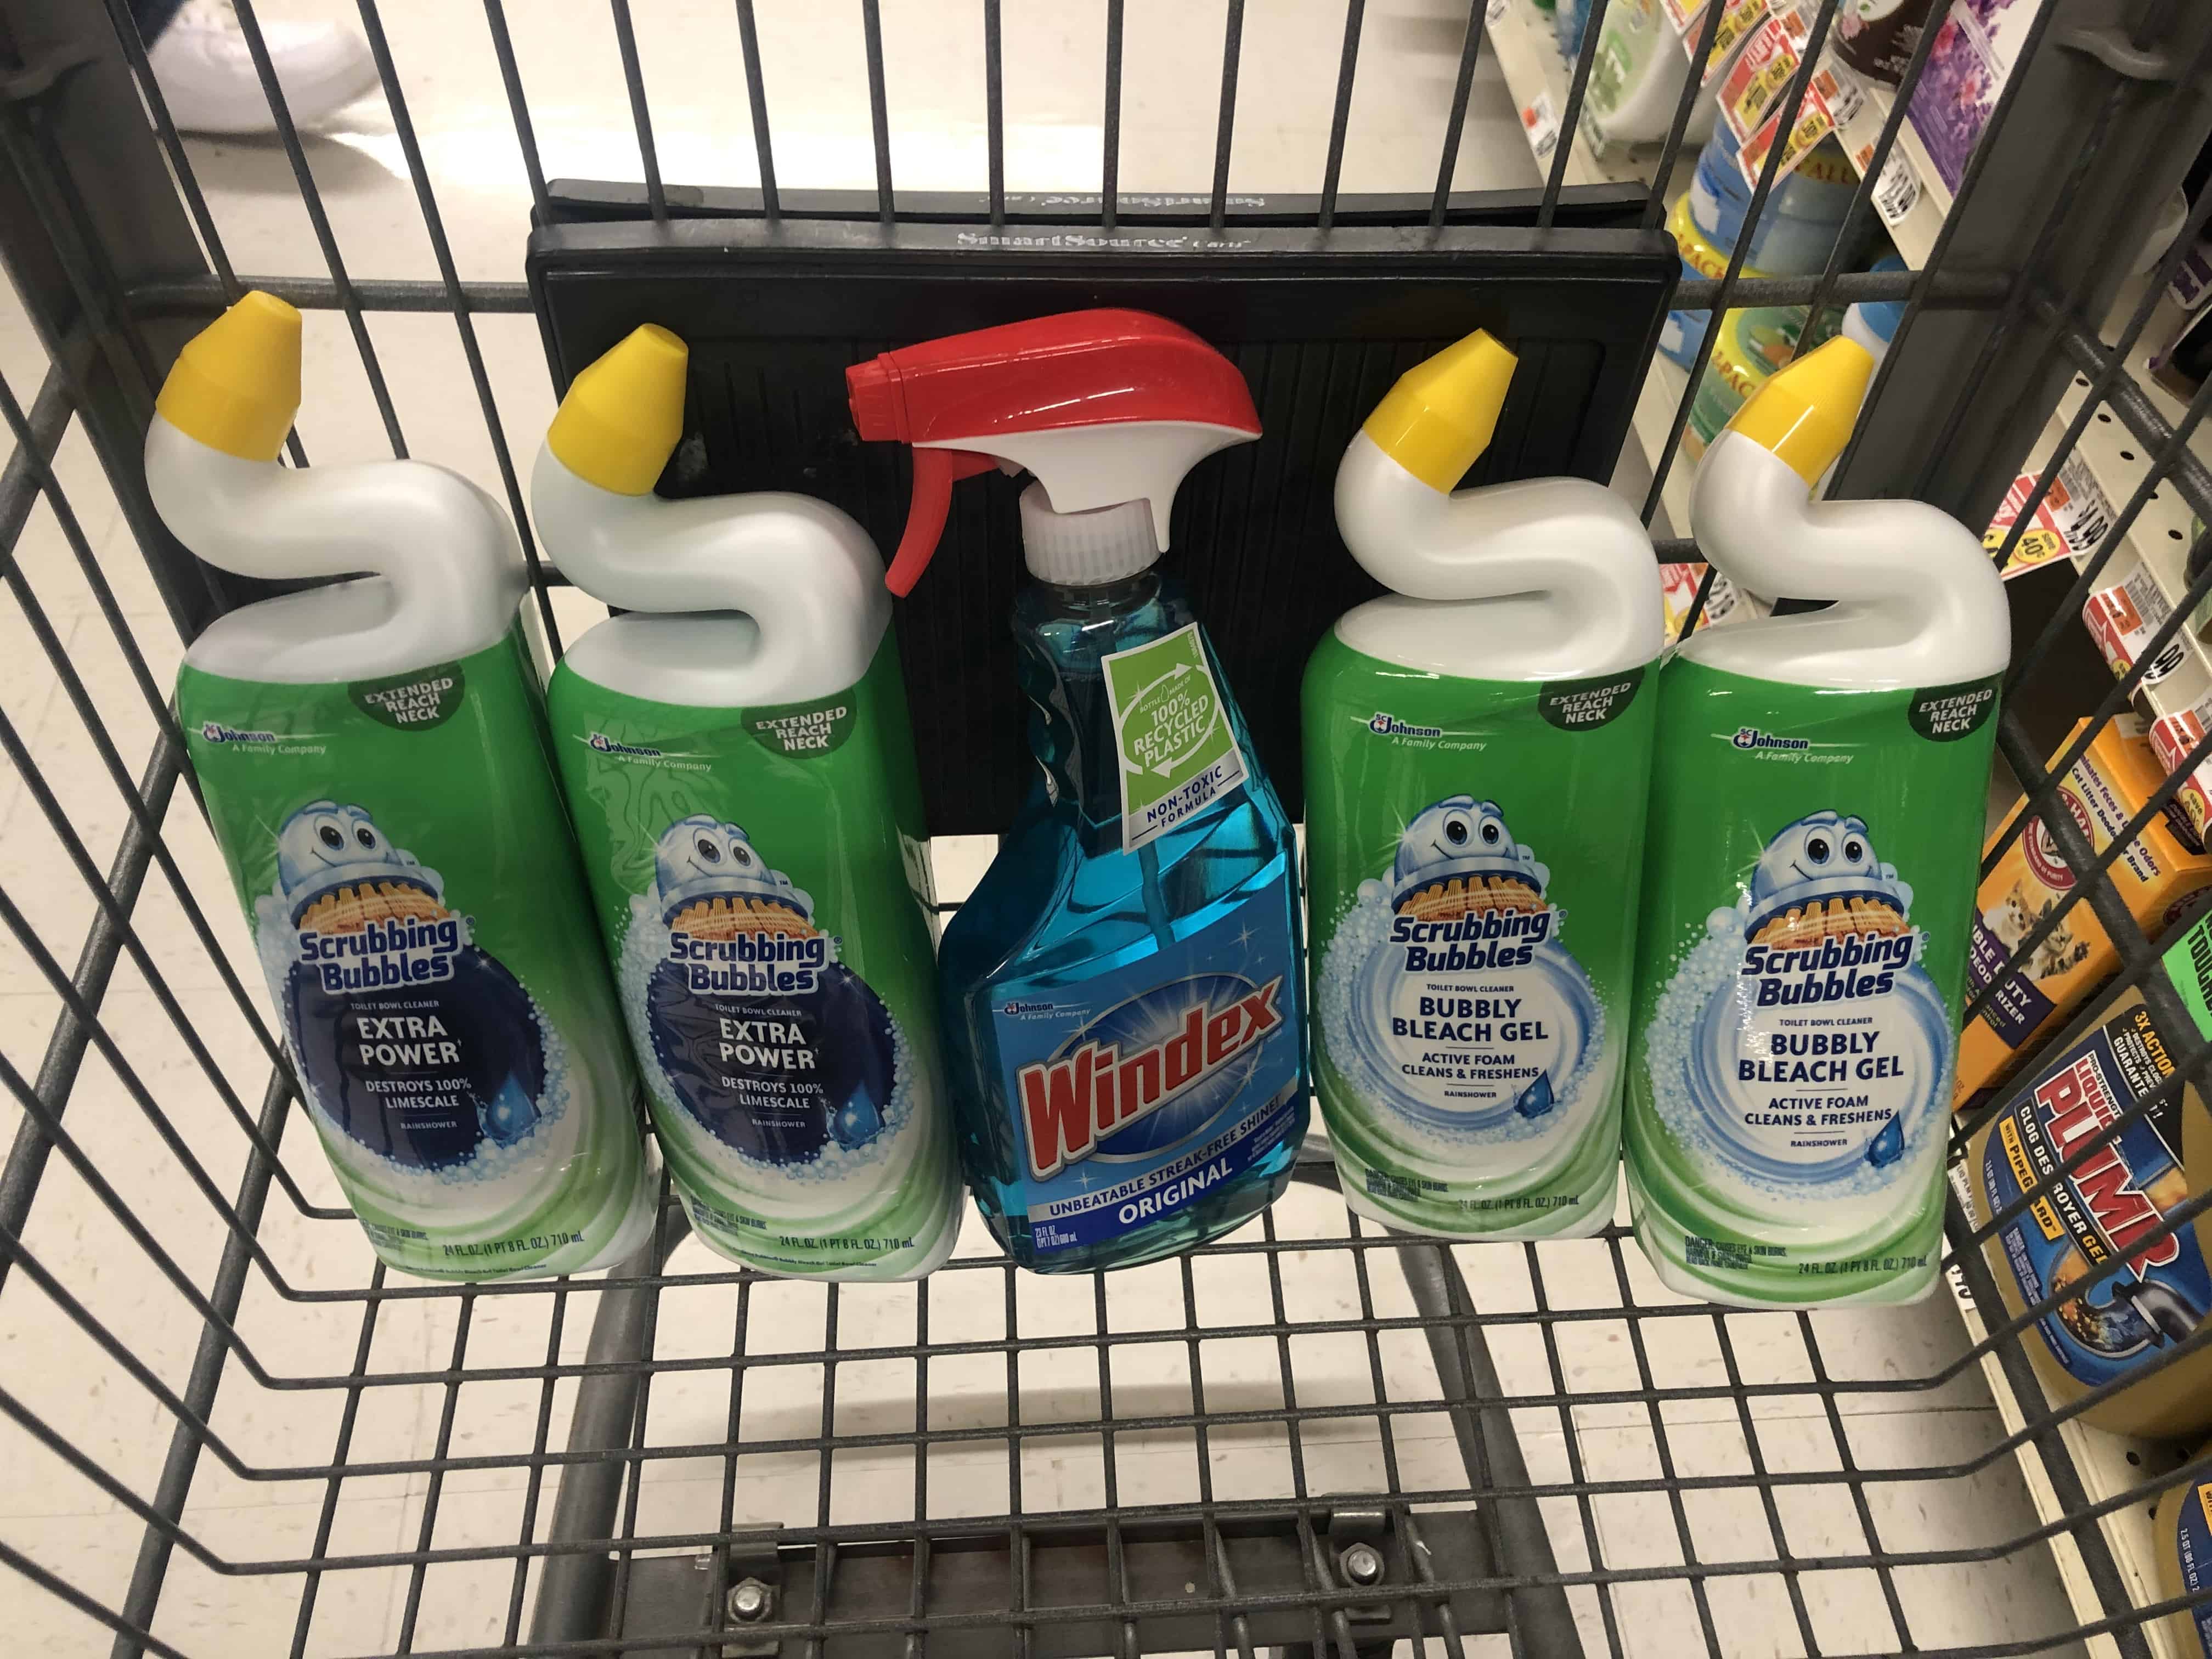 Giant: FREE Scrubbing Bubbles & Windex Products + Moneymaker & More Deals Starting 8/2!